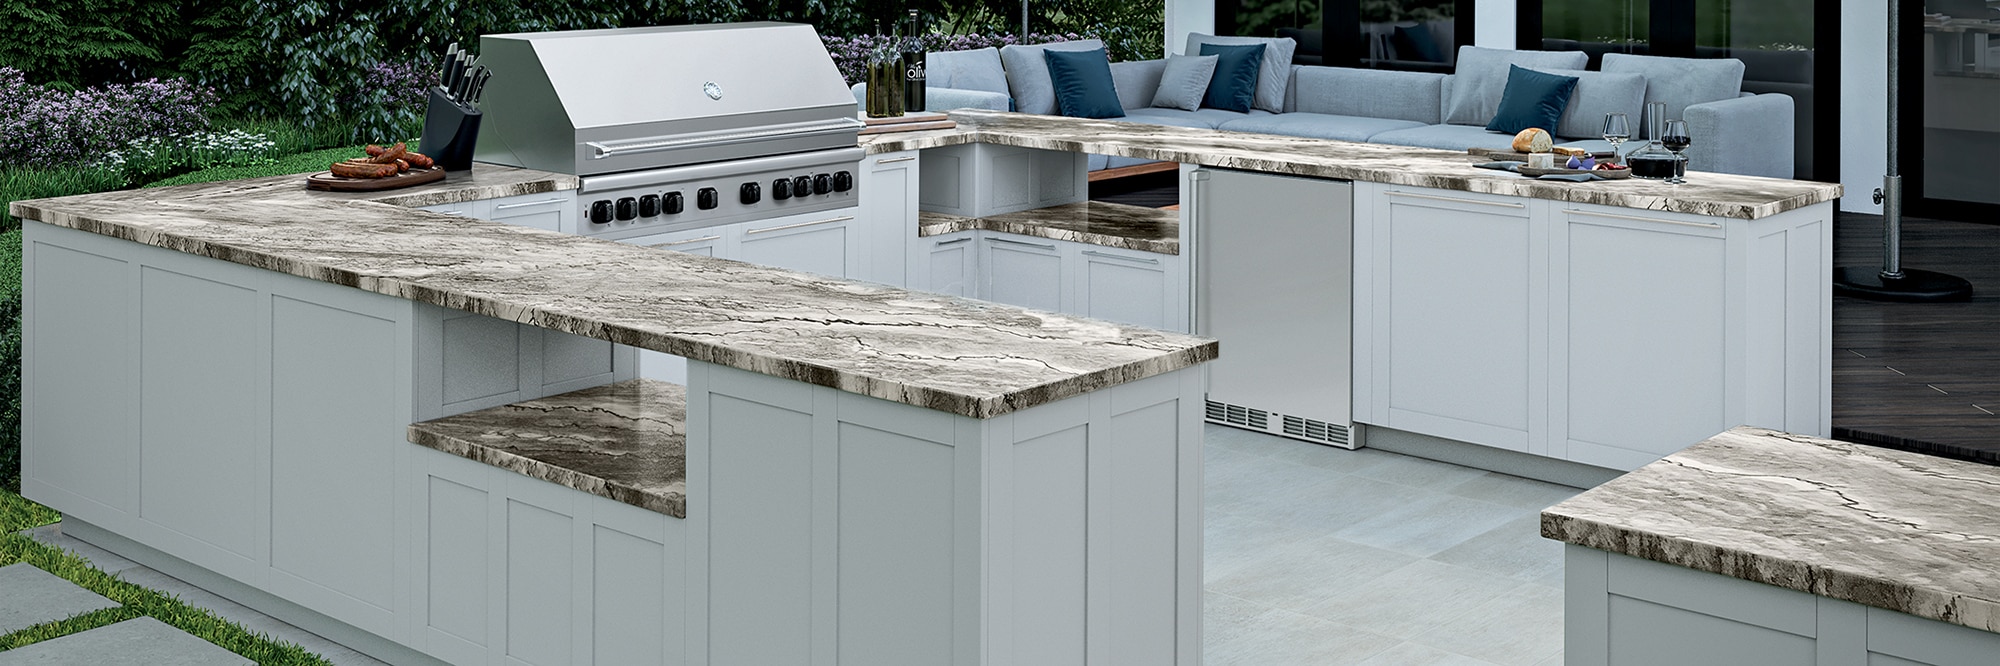 Outdoor kitchen with tan heavily veined quartzite countertops on white cabinets, stainless steel grill, gray stone-look tile flooring, and gray stone-look pavers set in grass.